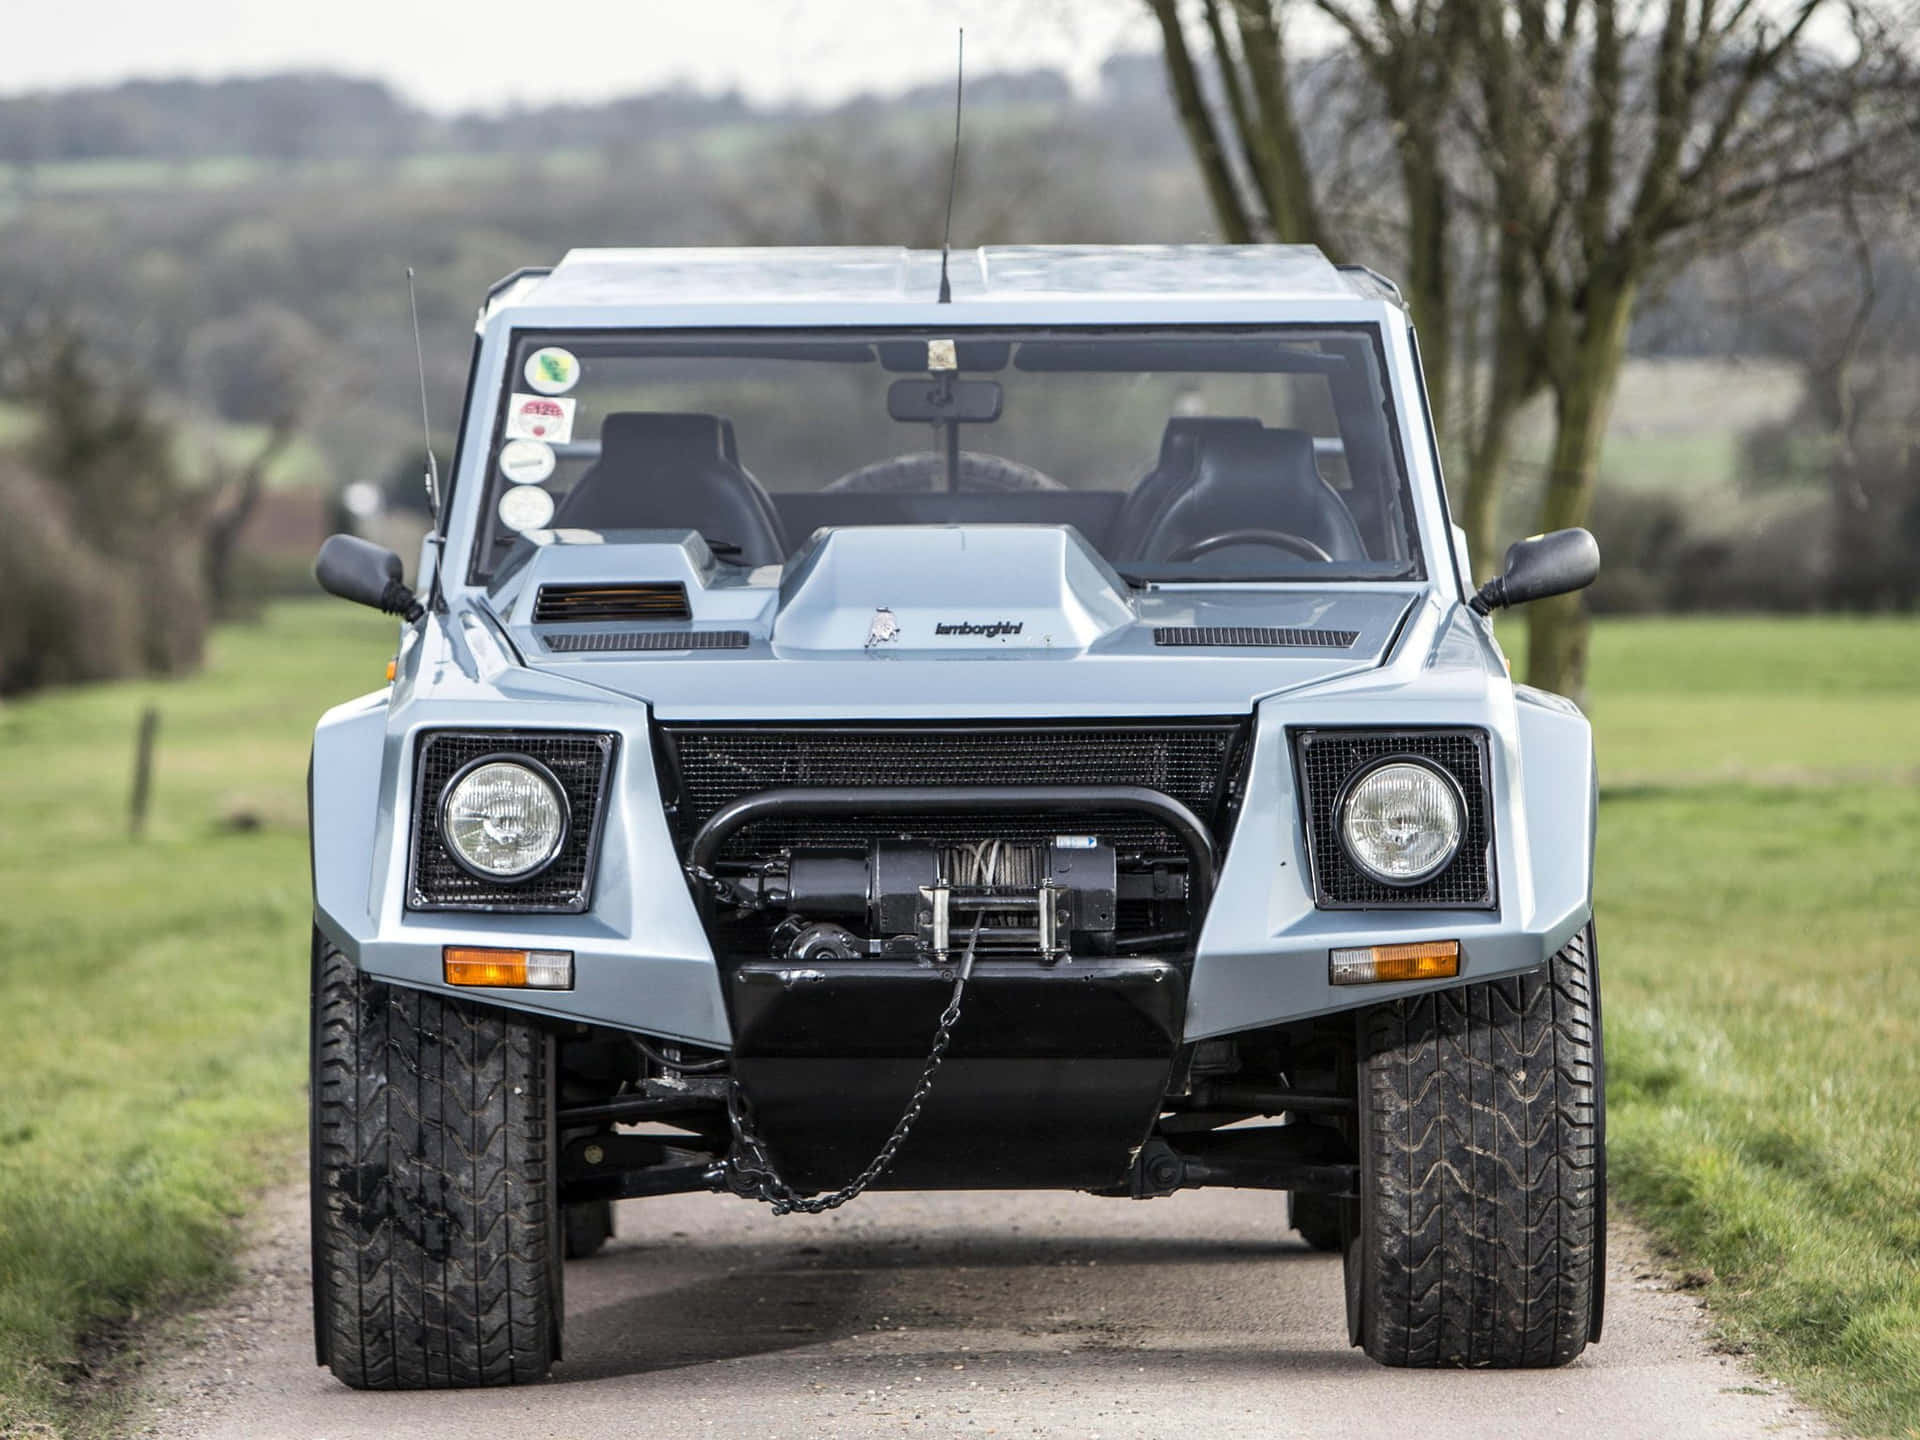 The iconic Lamborghini LM002 off-road luxury SUV in all its glory. Wallpaper